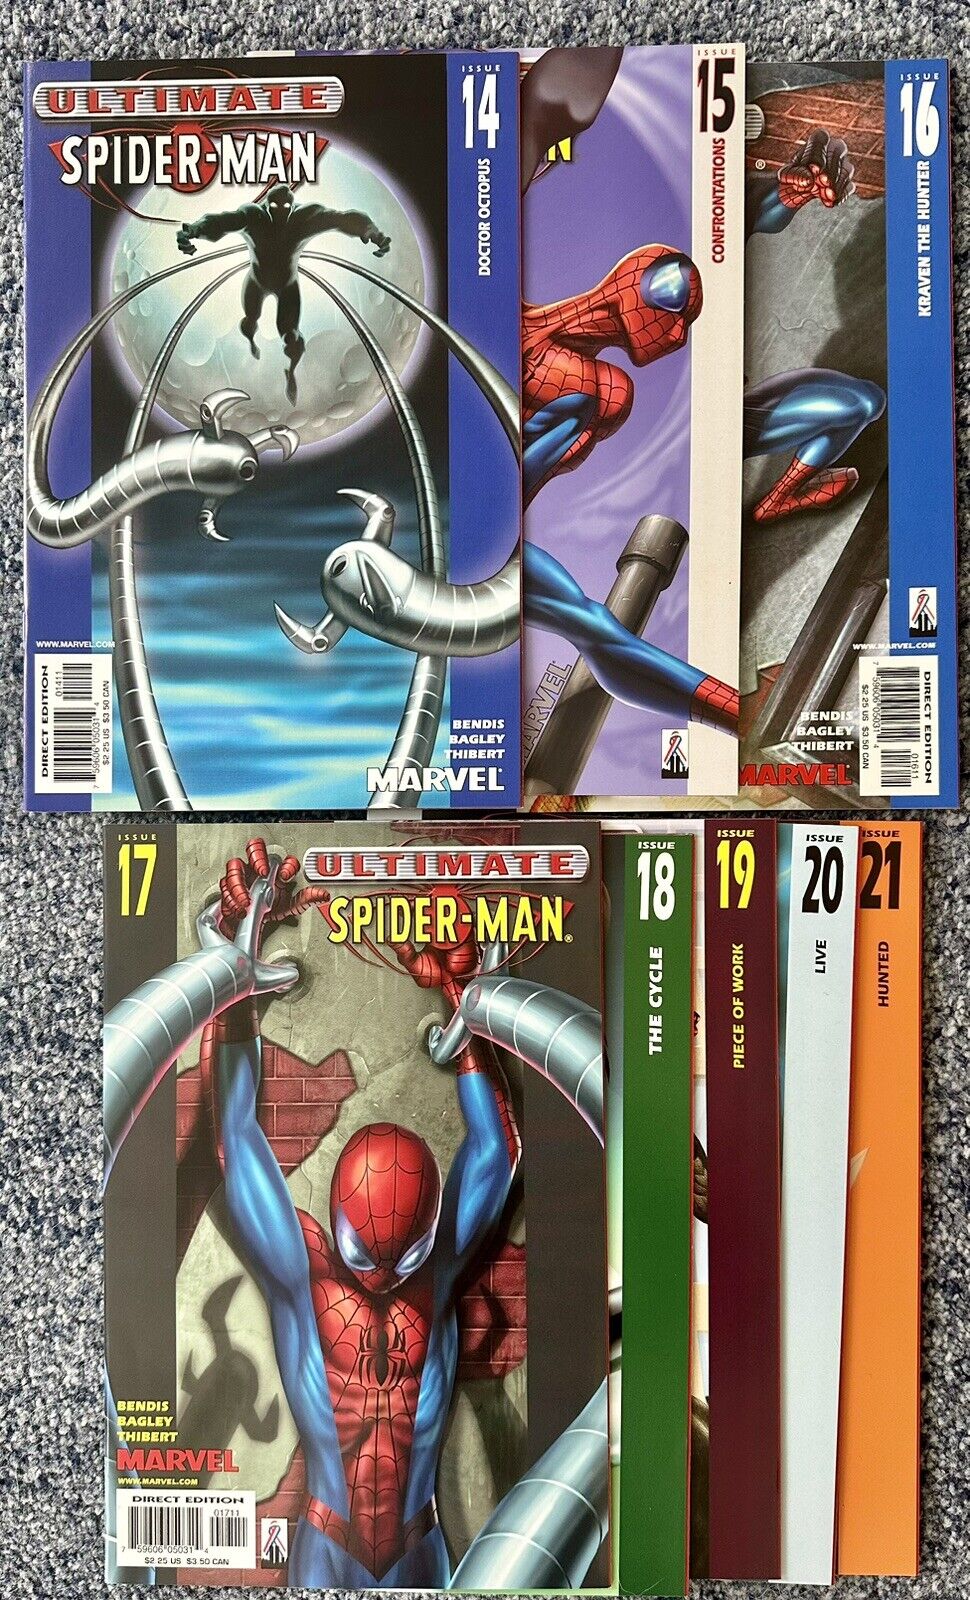 8 issues - Ultimate Spider-Man #14 + 15 + 16 + 17 + 18 + 19 + 20 + 21